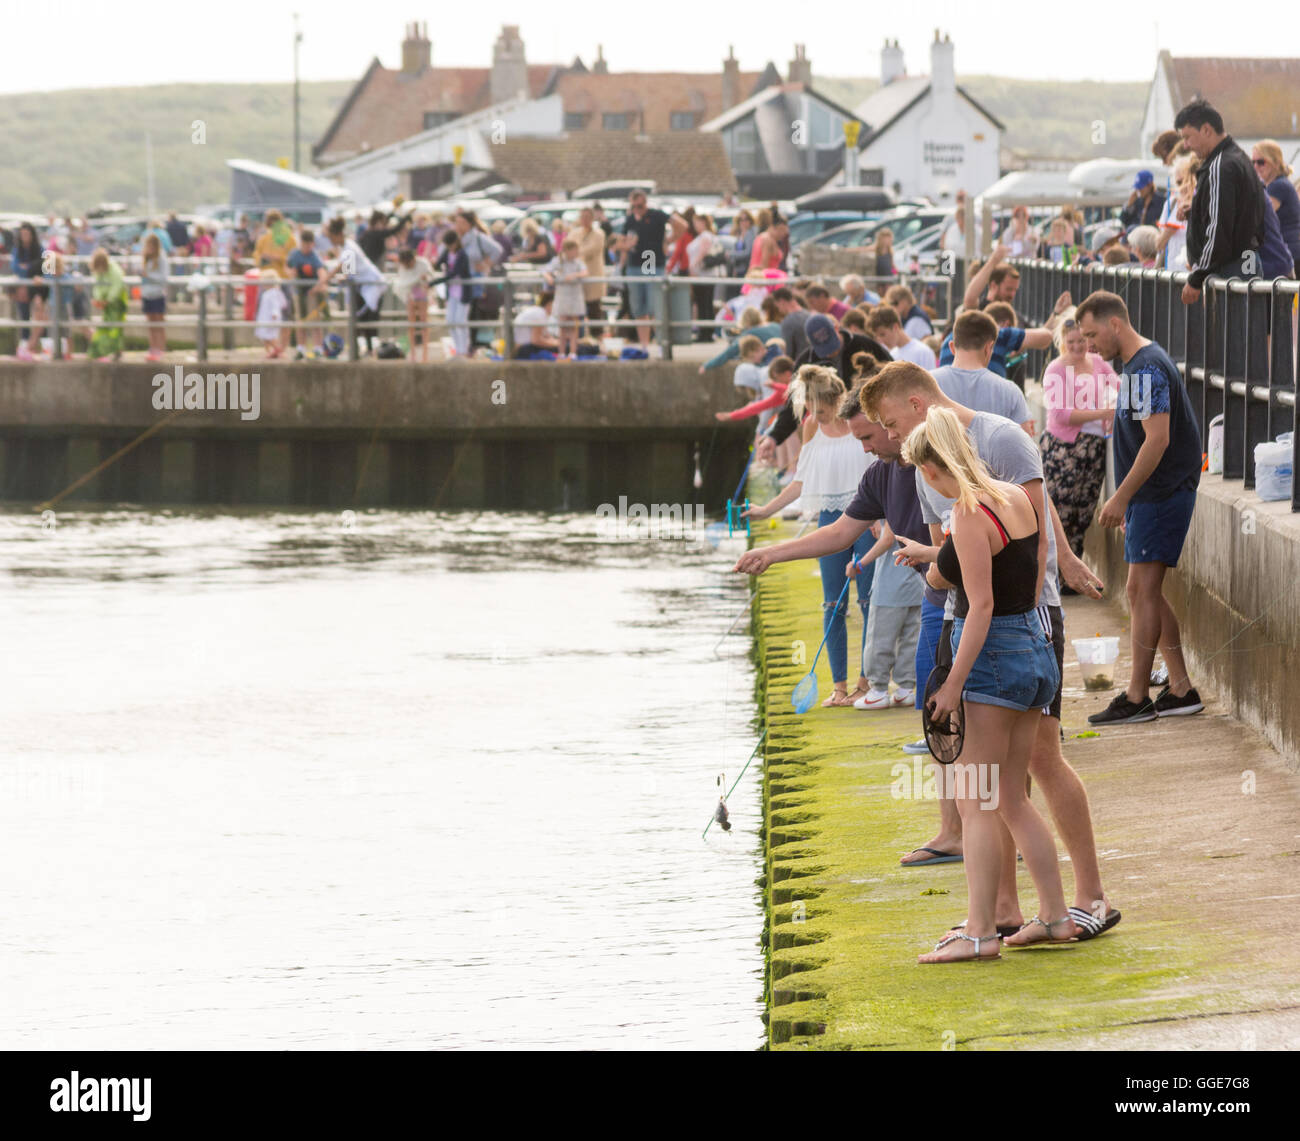 Catching crabs, or crabbing, is a popular summer weekend activity for young and old at Mudeford Quay, Dorset, UK. Stock Photo